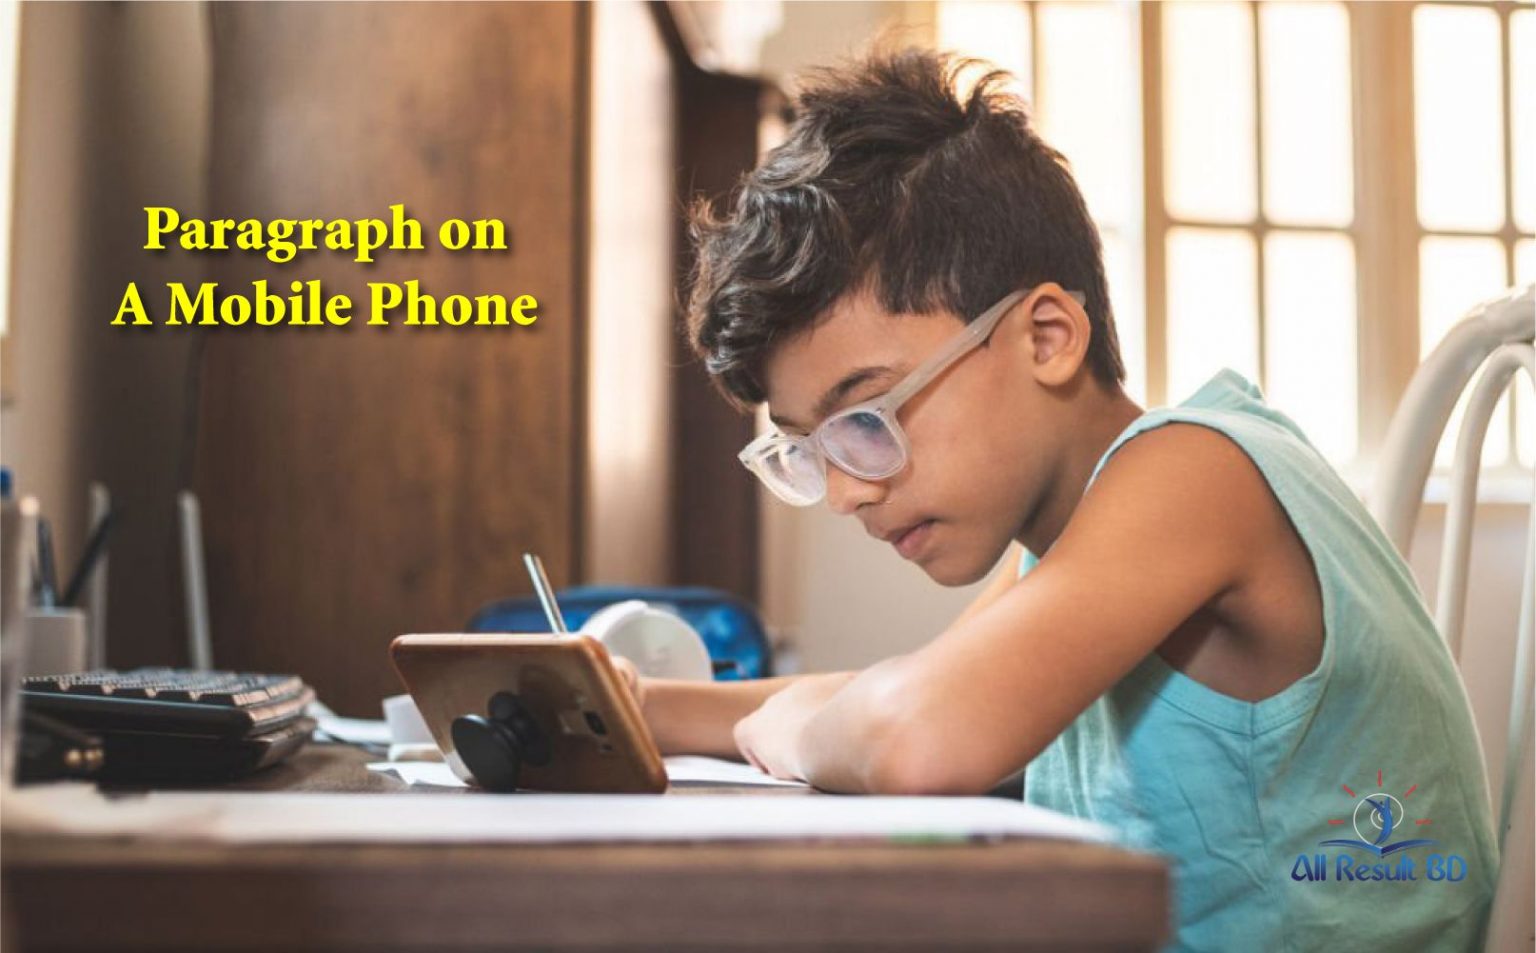 essay on mobile phone of 250 words